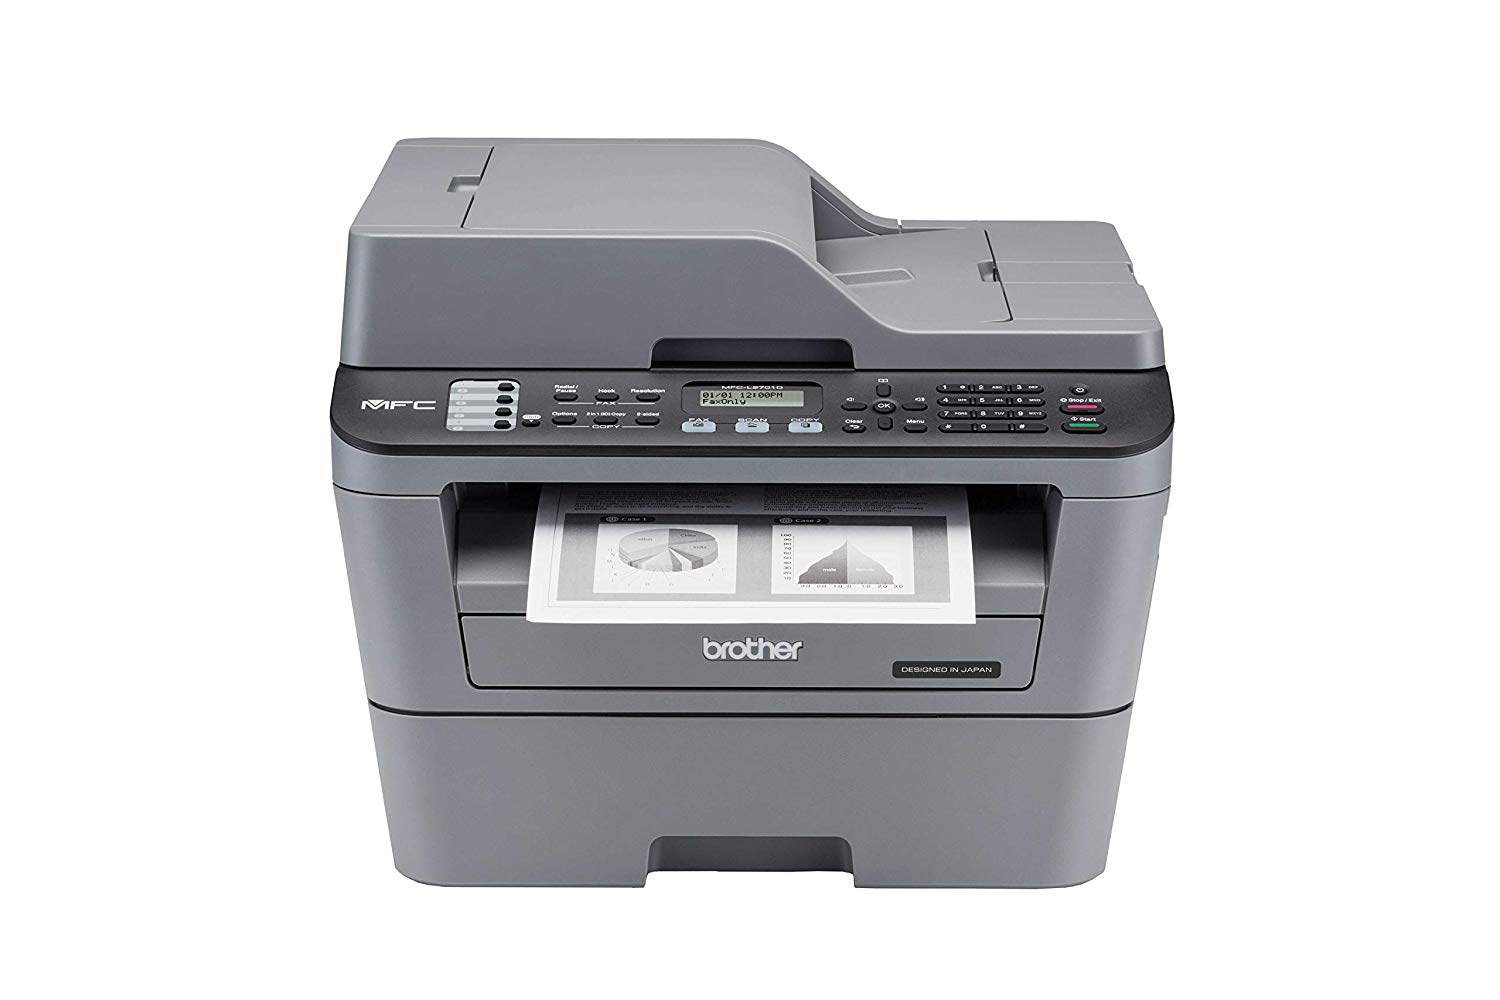 Brother Monocrom Laser Multi-Function Printer MFC-L2701D Print, Scan, Copy, Fax, 30 PPM, 32 MB Memory, 35 Sheets ADF with Duplex